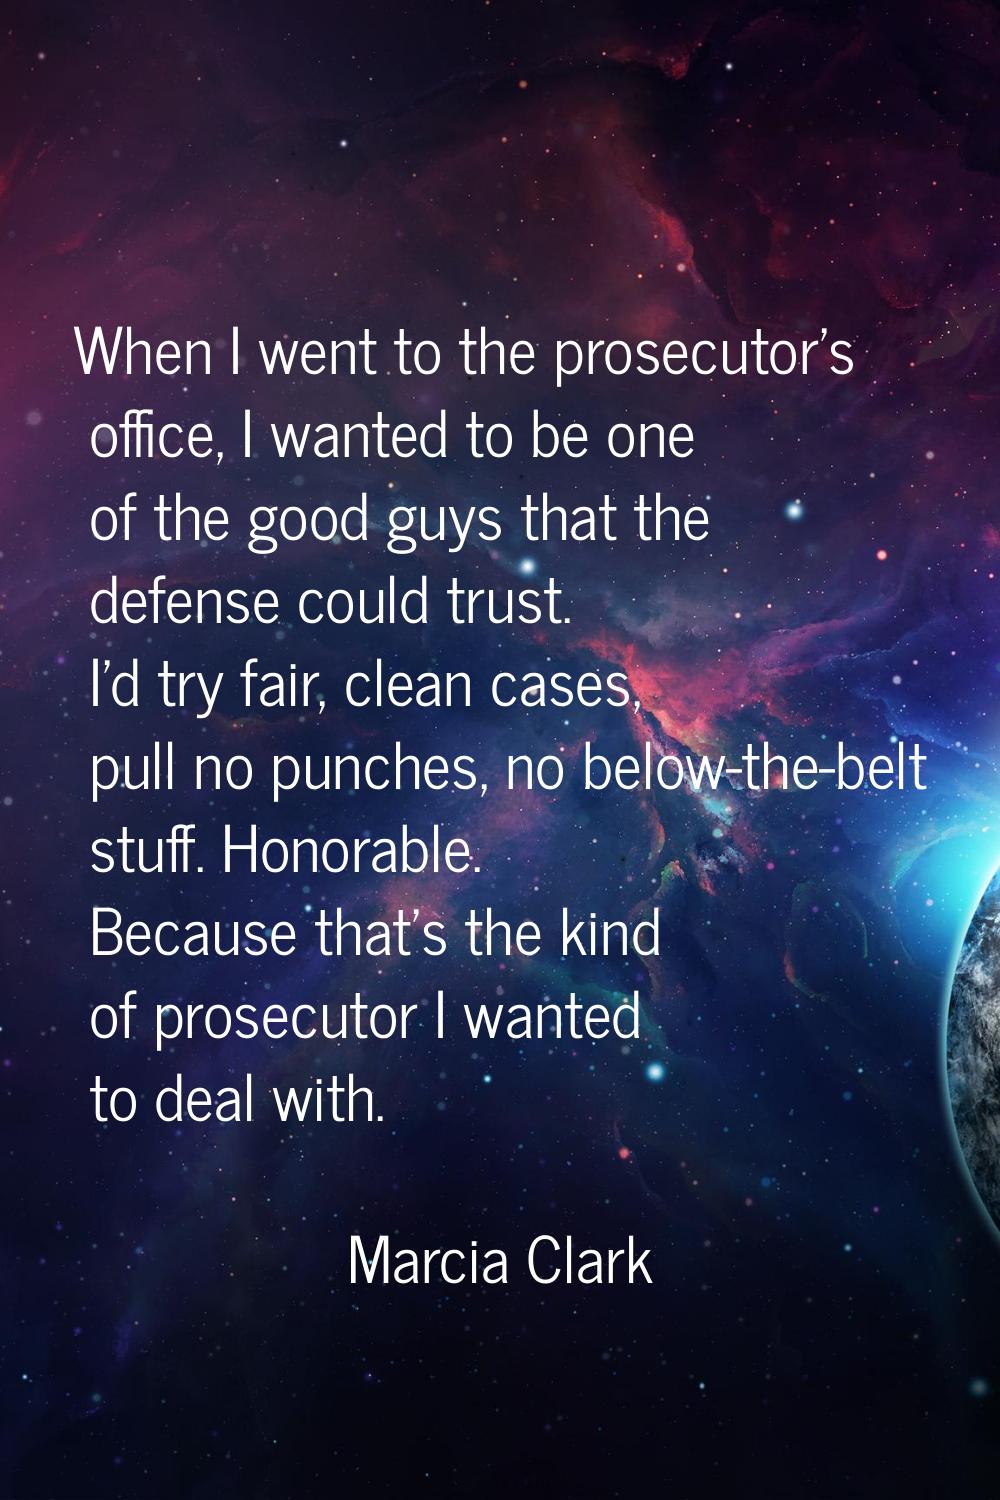 When I went to the prosecutor's office, I wanted to be one of the good guys that the defense could 